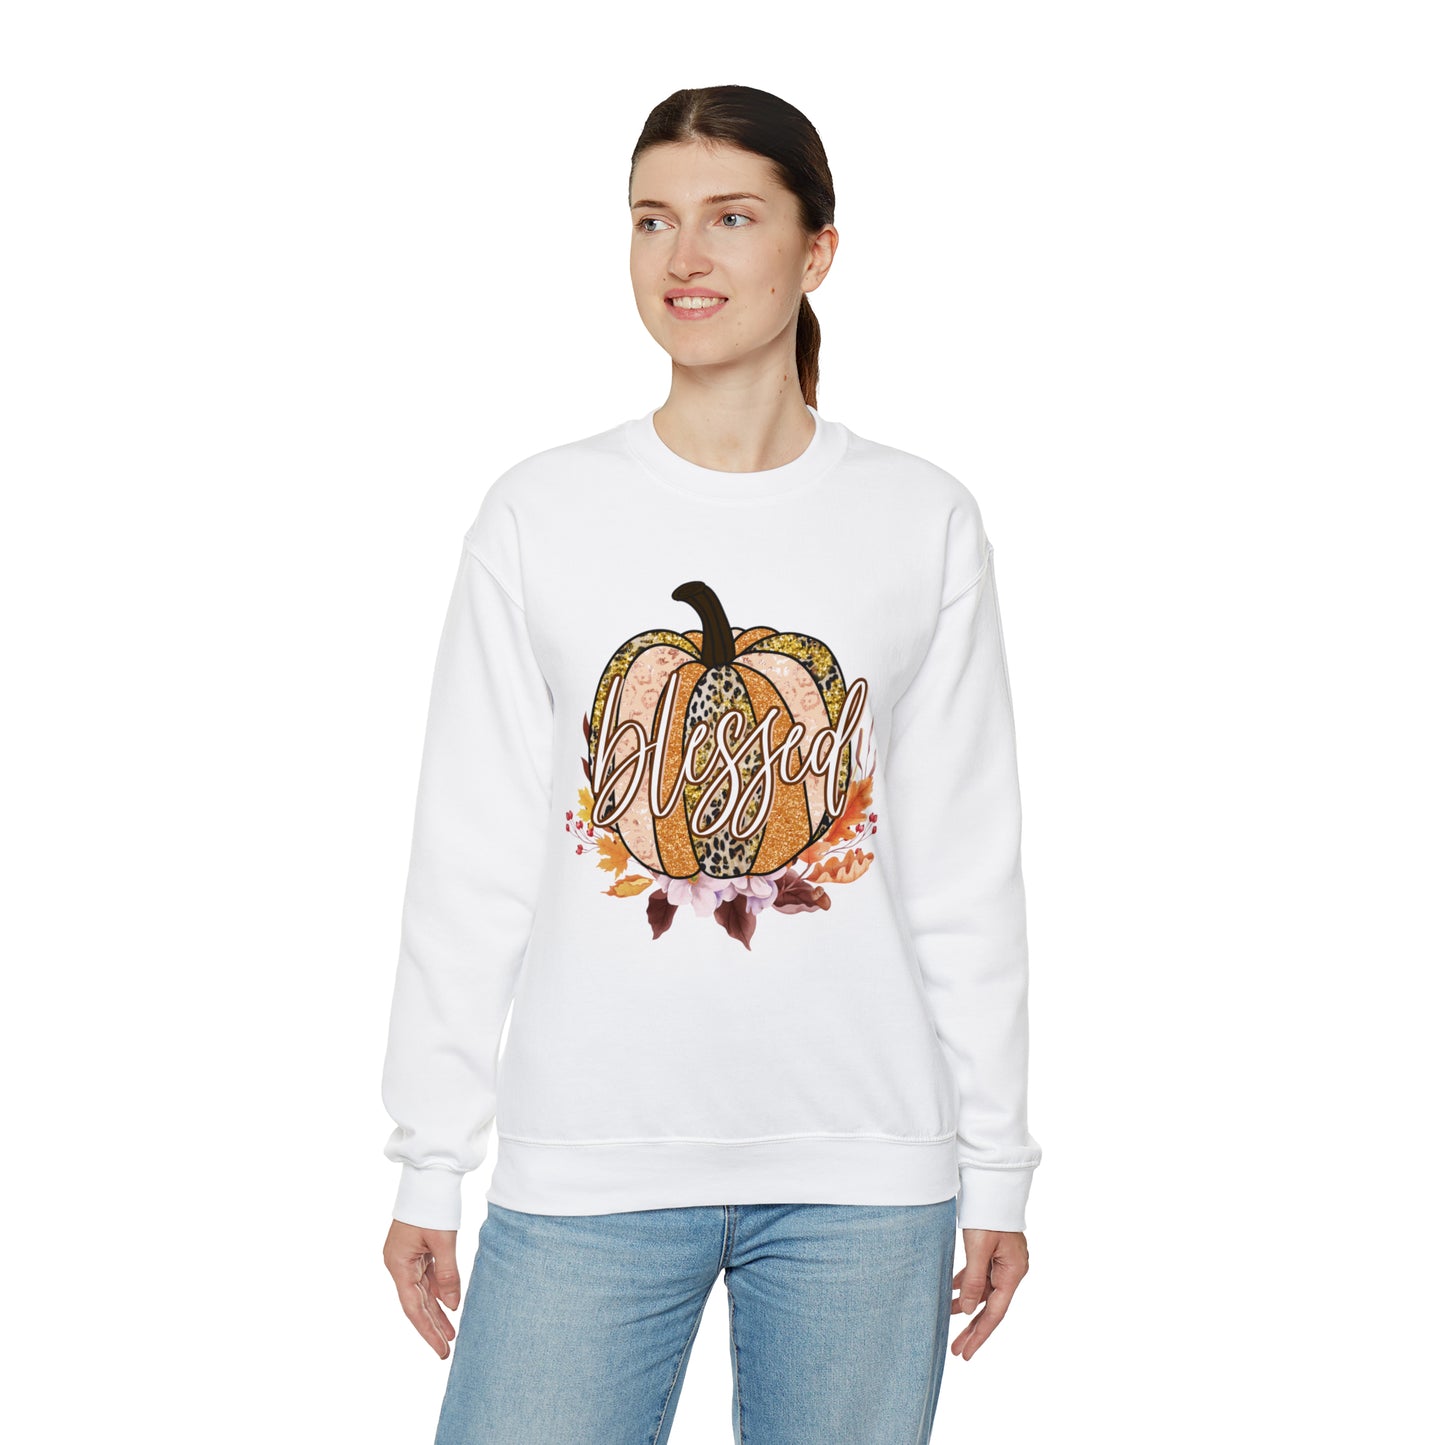 "Blessed & Autumn-Infused: The Quintessential Fall Sweater"